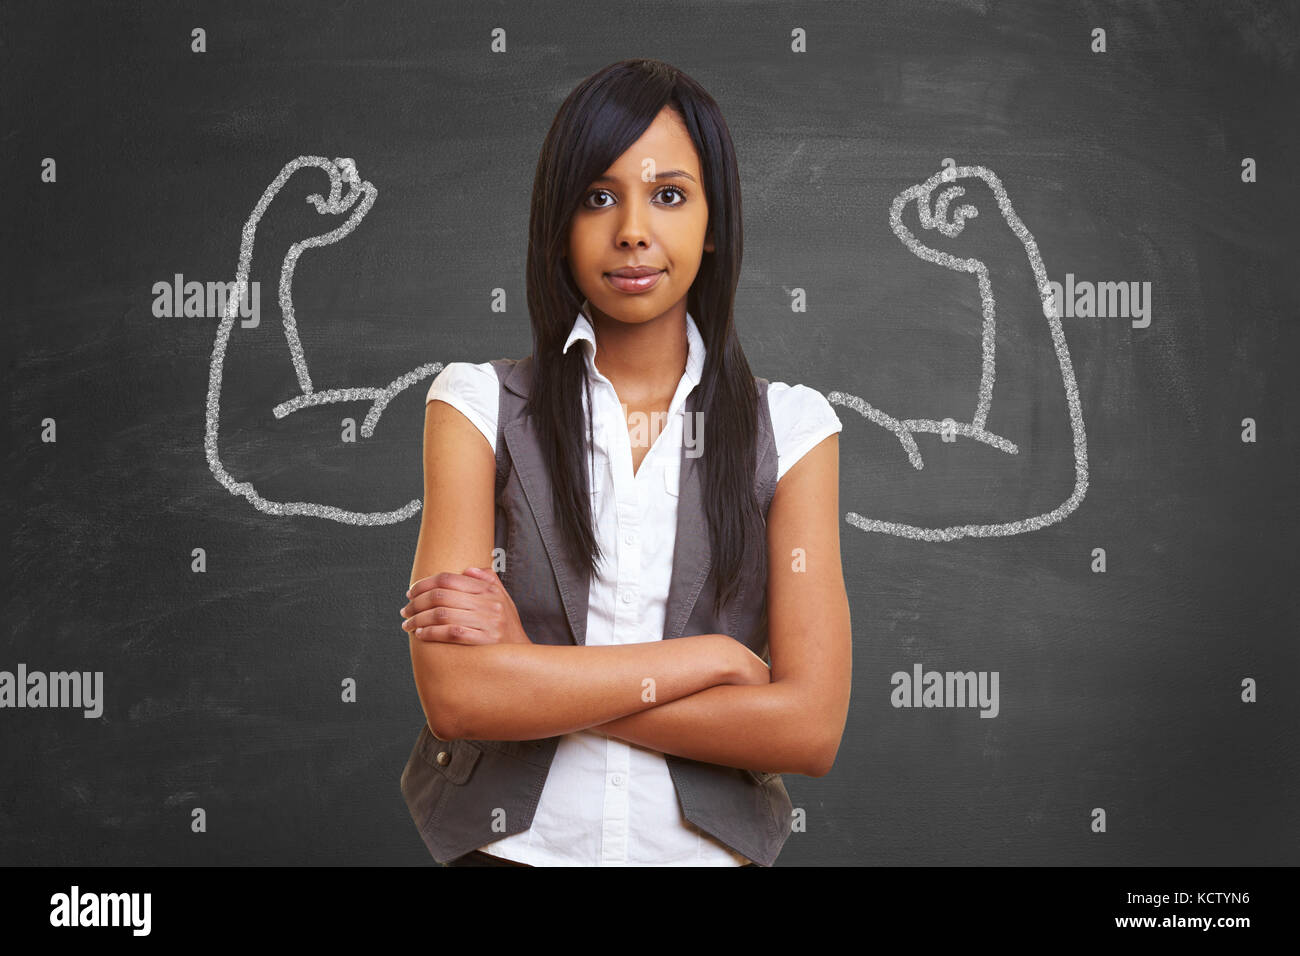 Strong and powerful woman with self confidence and chalk muscles Stock Photo